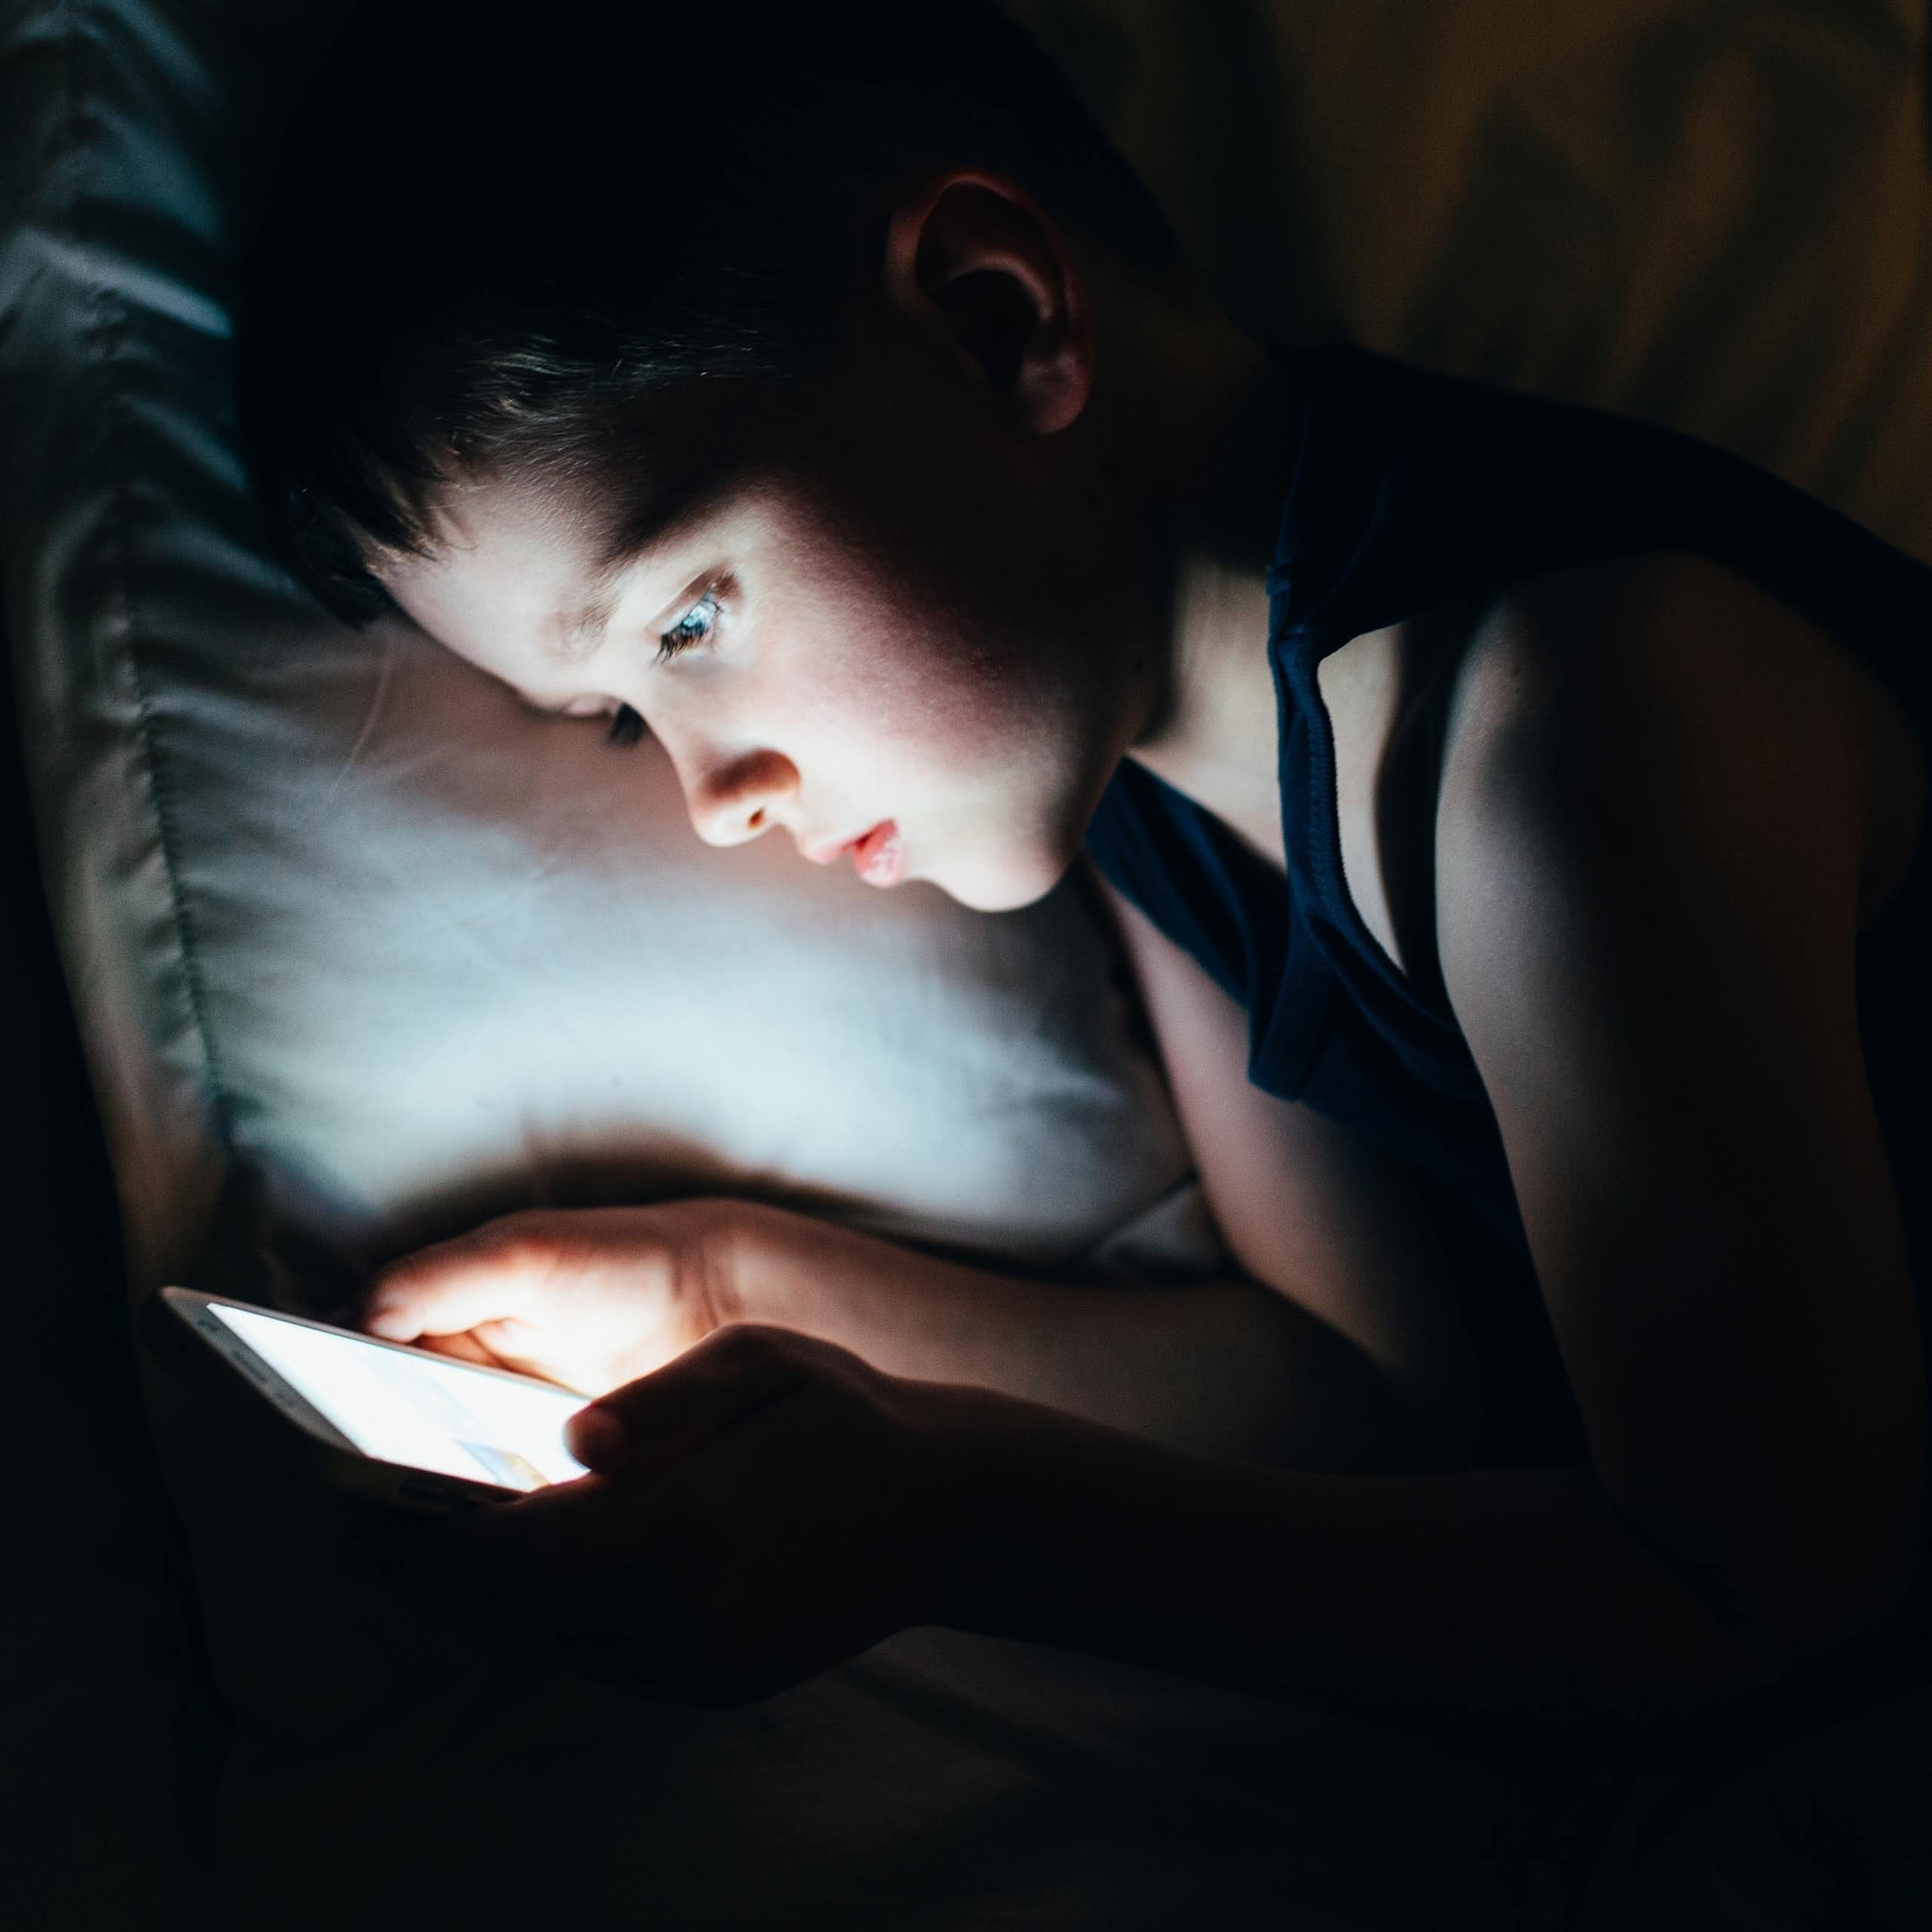 A young boy late at night on a smartphone in bed.